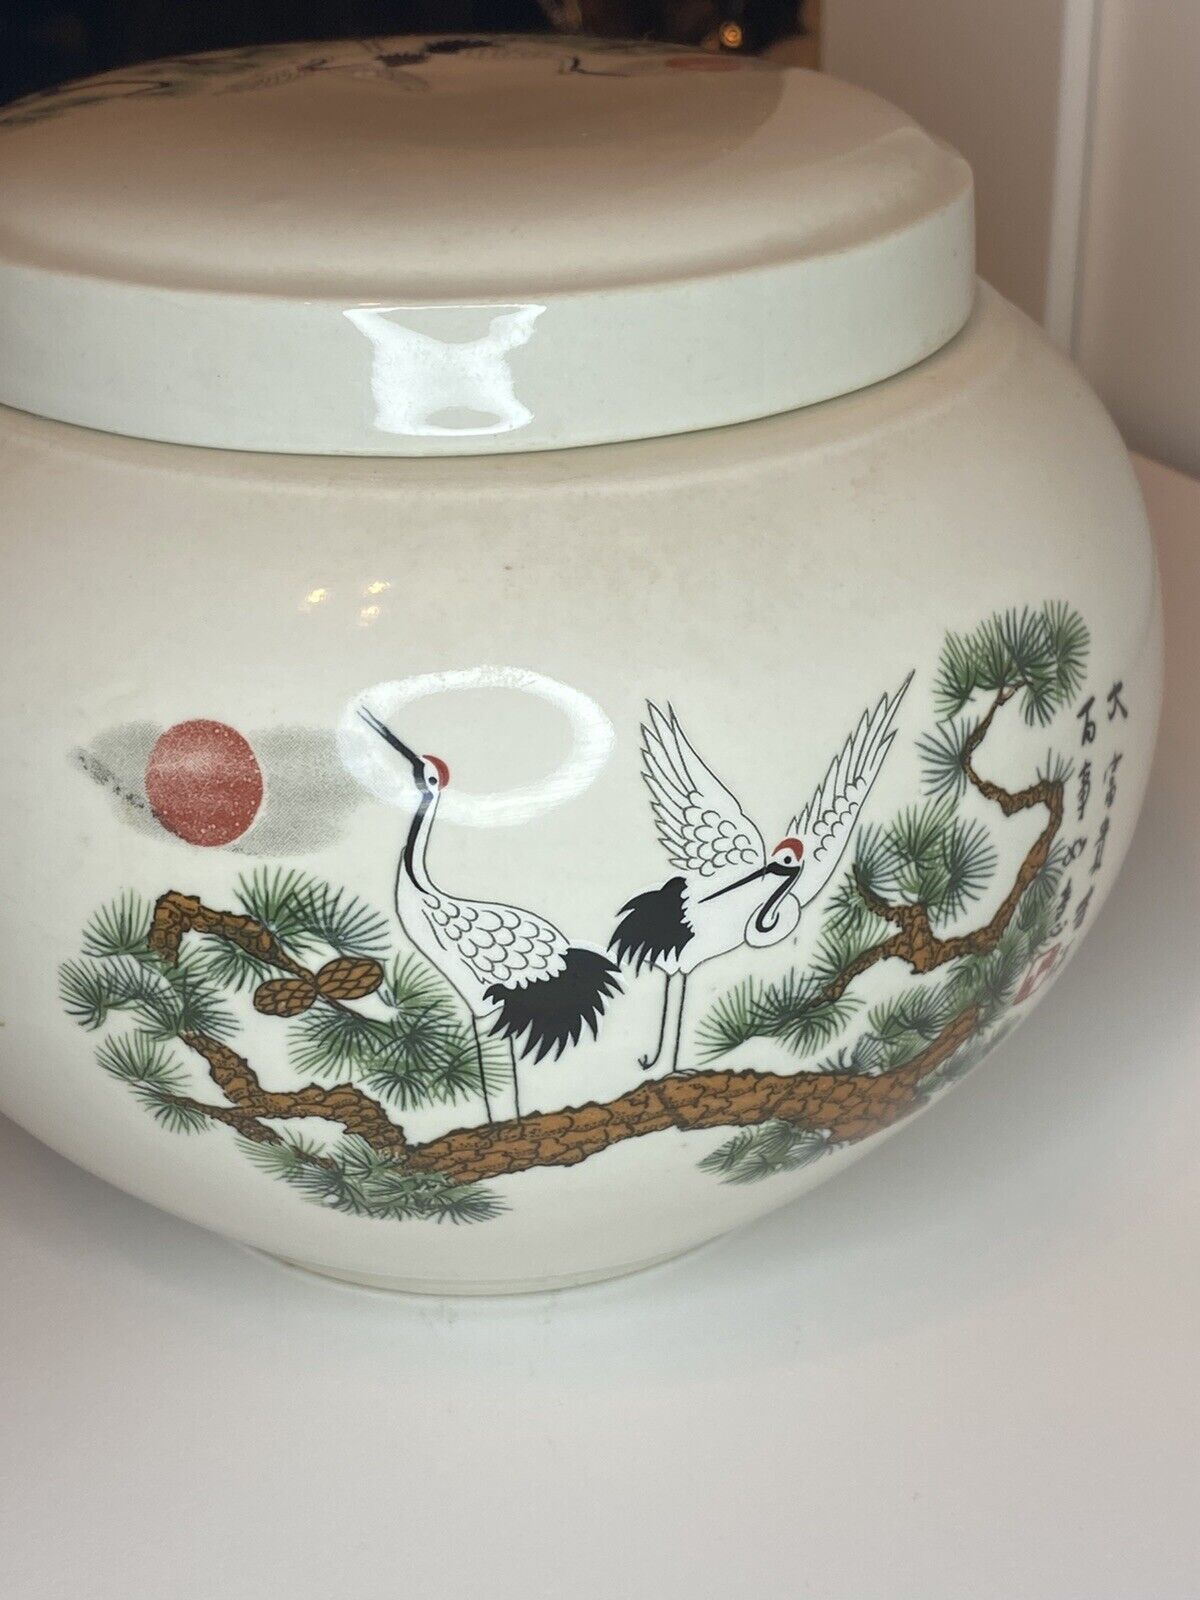 Vintage New Ivory China Ginger Jar, Asian Home Decor, Red-Crowned Cranes, Small